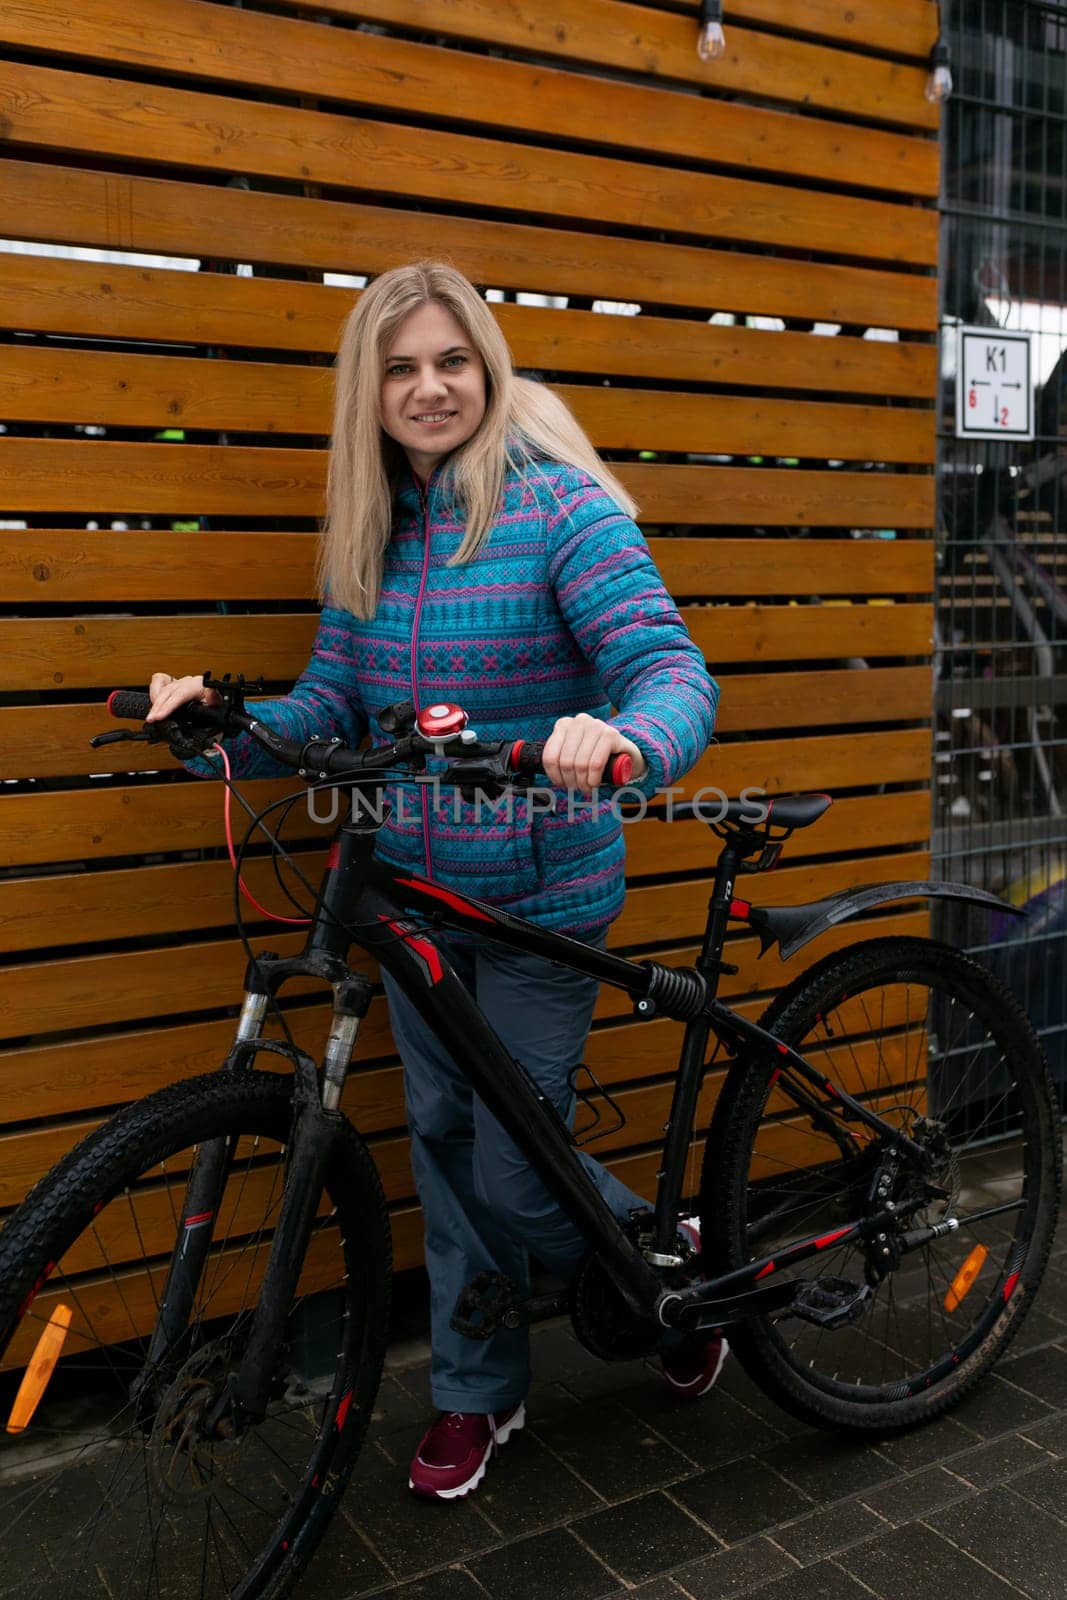 European woman with blond hair went out for a bike ride in winter by TRMK